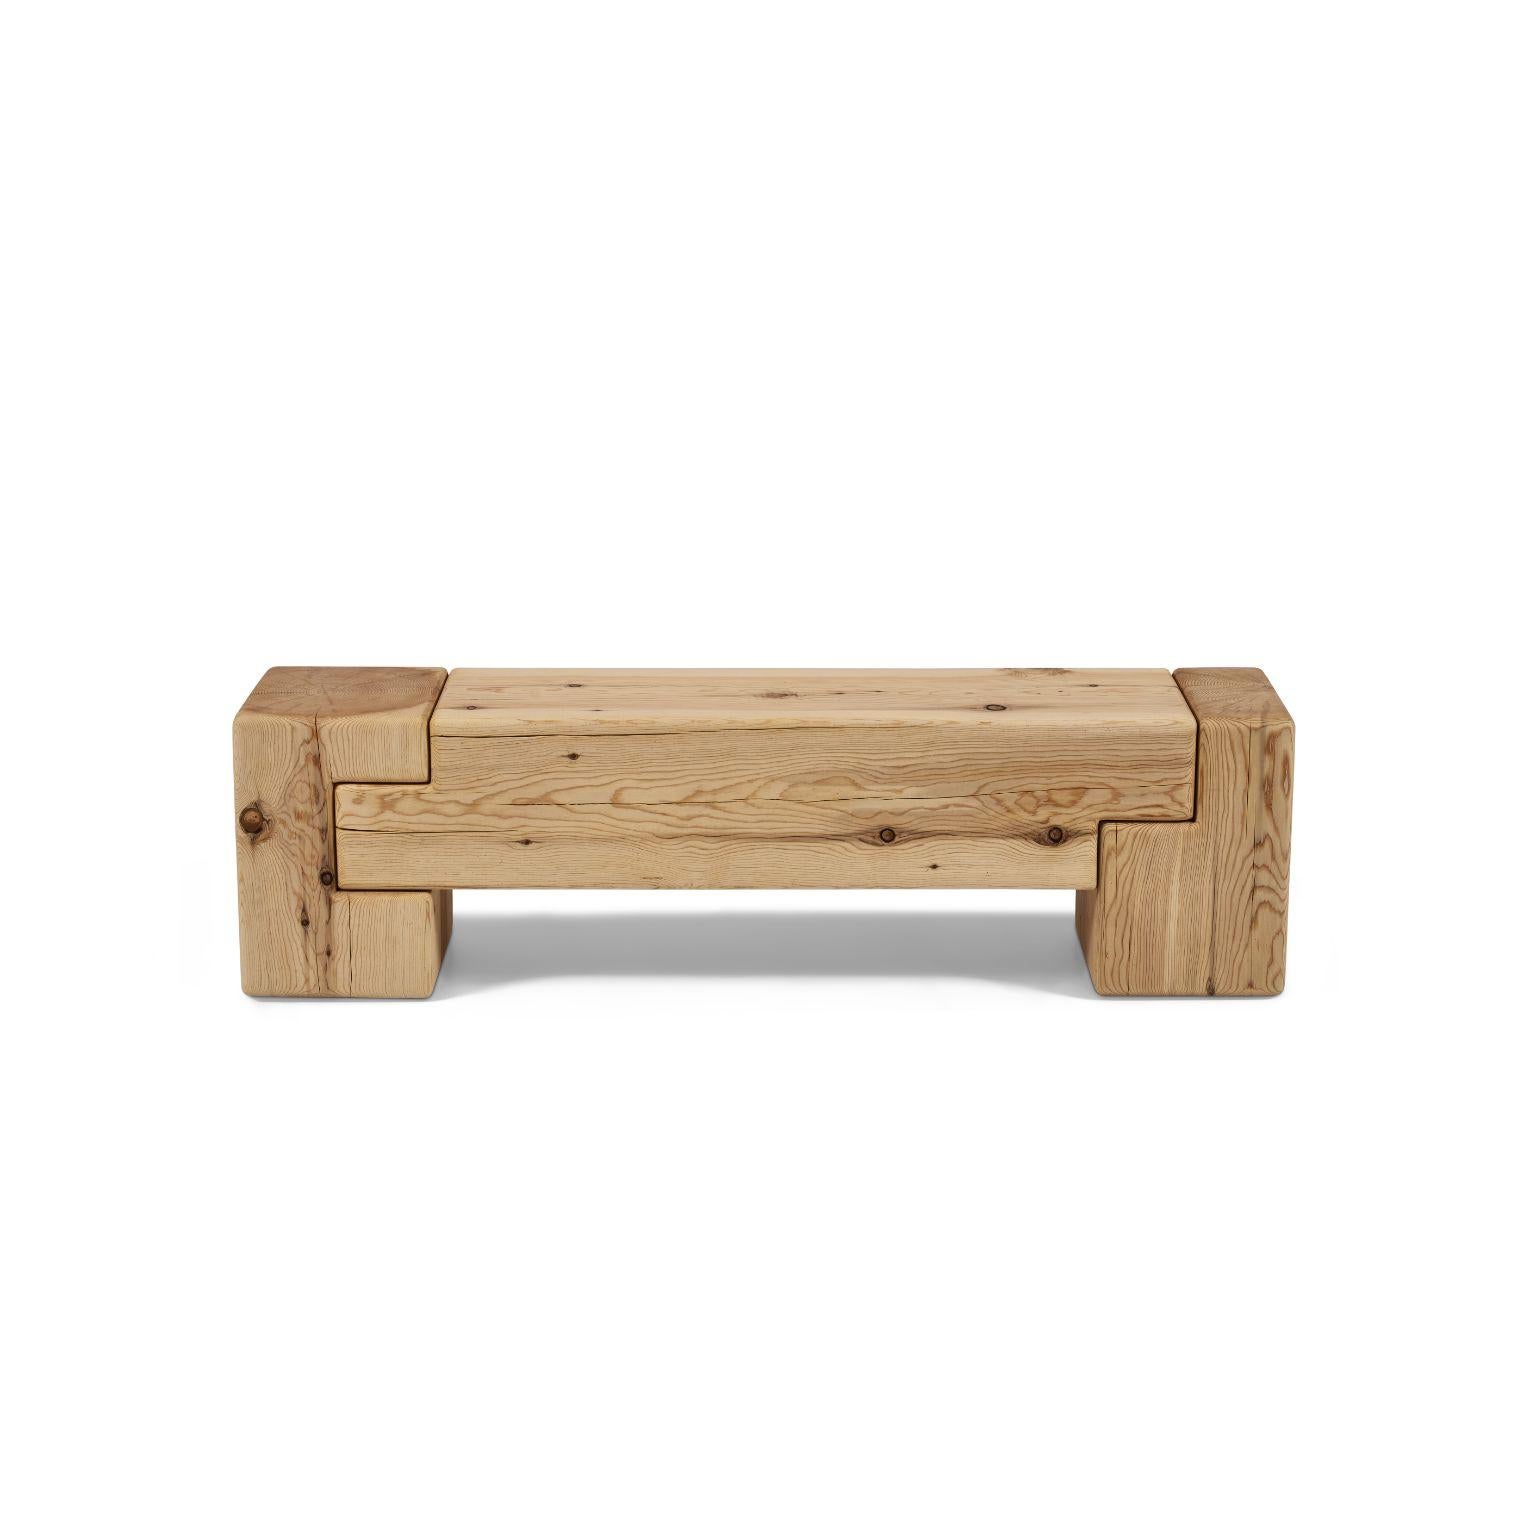 Aromatique Cedre Monoblock bench by Contemporary Ecowood
Dimensions: W 131 x D 29 x H 38 cm
Materials: Cedre
Finishing: Monocoat wood oil

Contemporary Ecowood’s story began in a craft workshop in 2009. Our wood passion made us focus on fallen